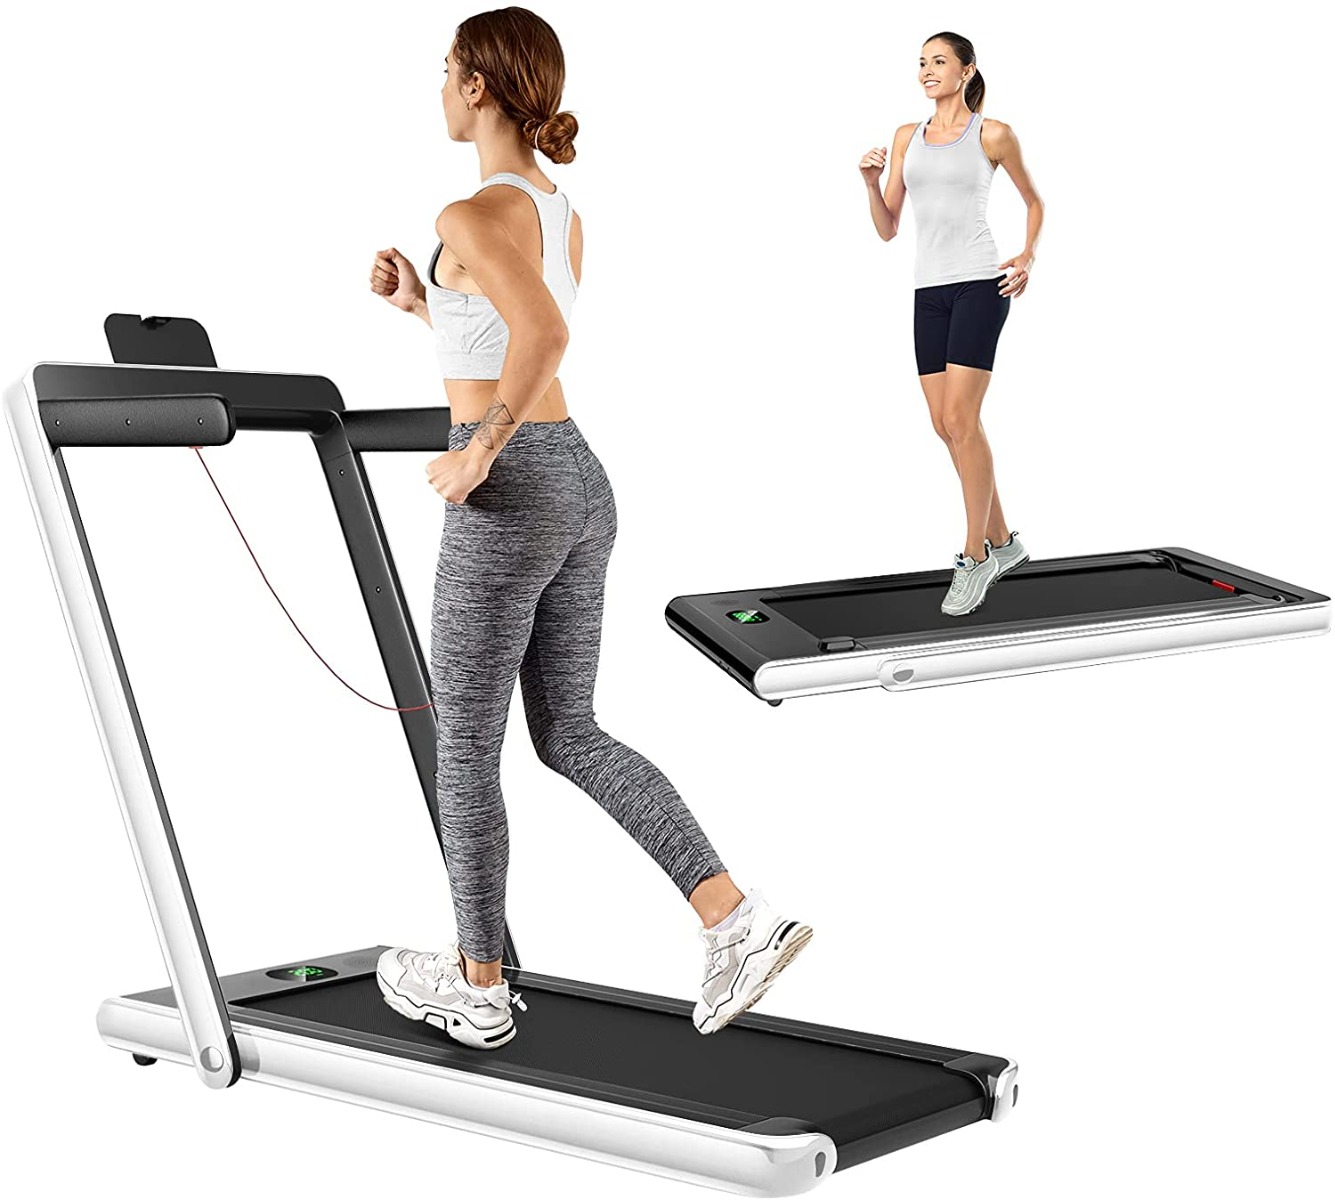 1-12Kph Folding Electric Treadmill with Bluetooth Capability-Silver